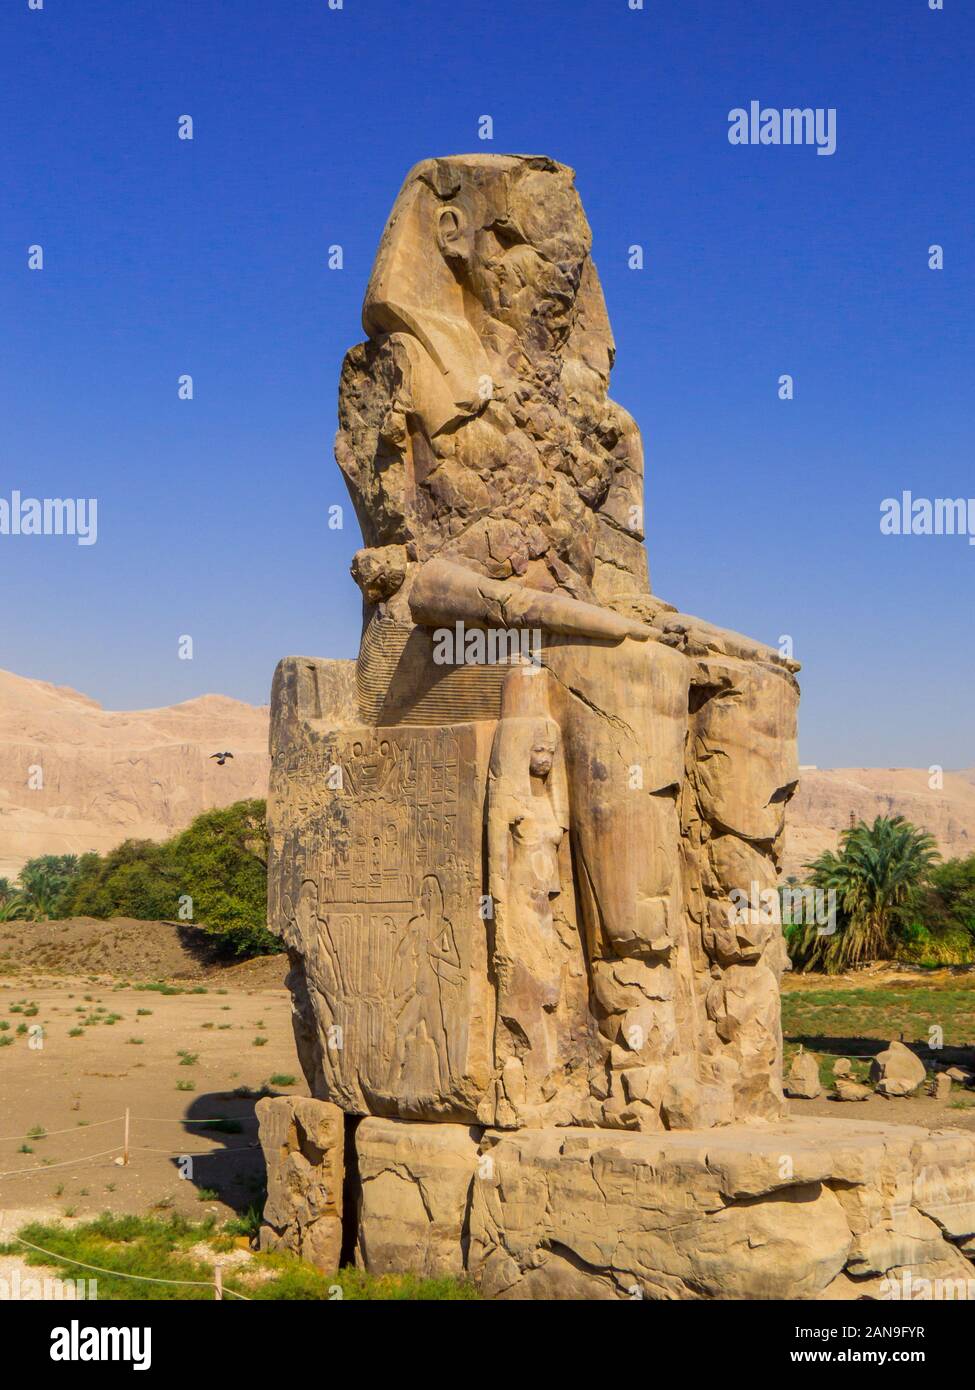 View of the gigantic Colossi of Memnon (left statue) in the Mortuary Temple of Amenhotep III in Luxor, Egypt Stock Photo